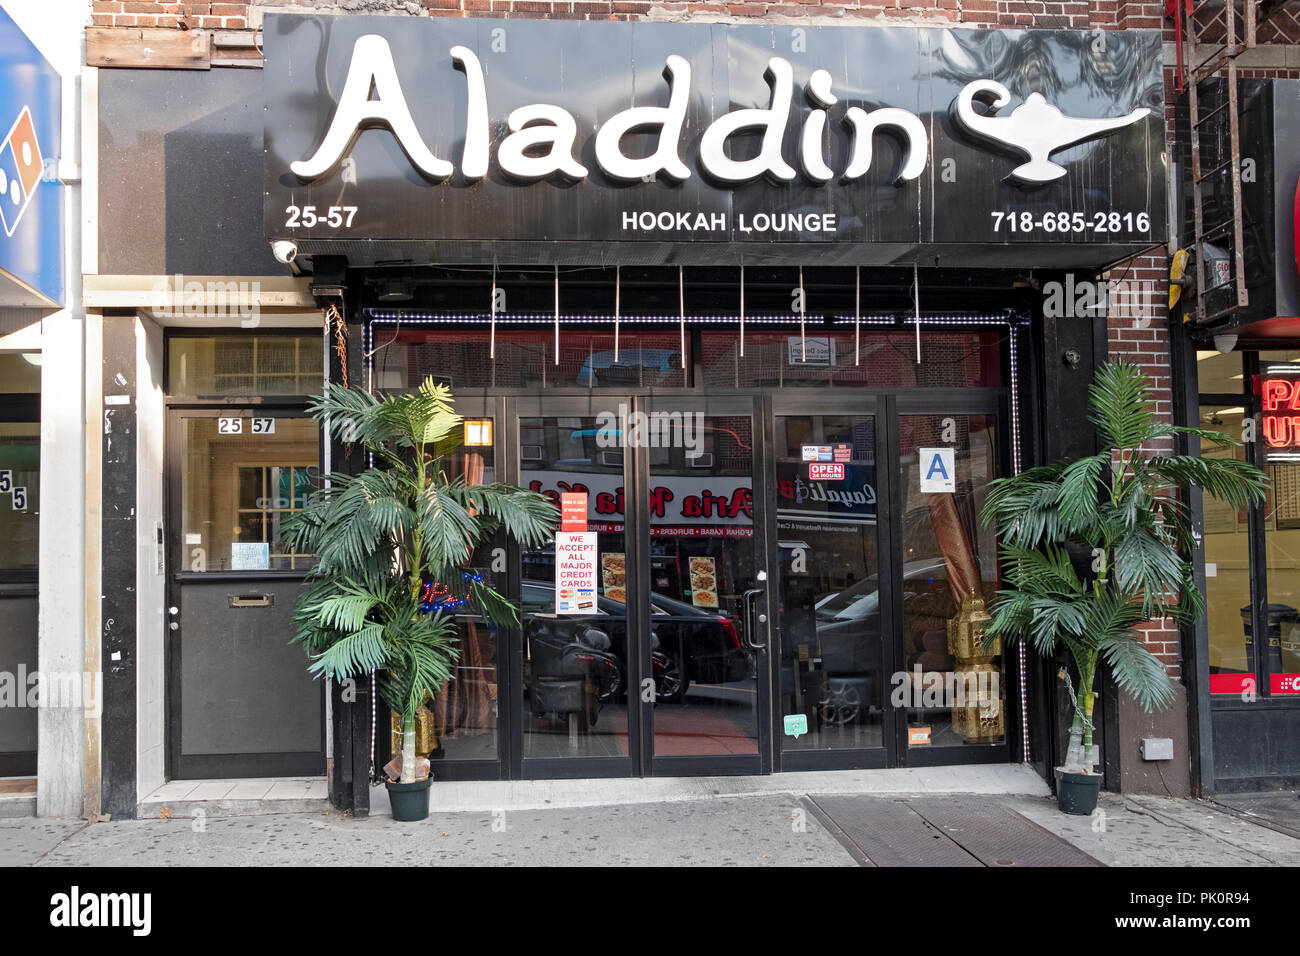 The exterior of the Aladdin Hookah Lounge on Steinway Street in the Little Egypt section of Astoria, Queens, New York Stock Photo